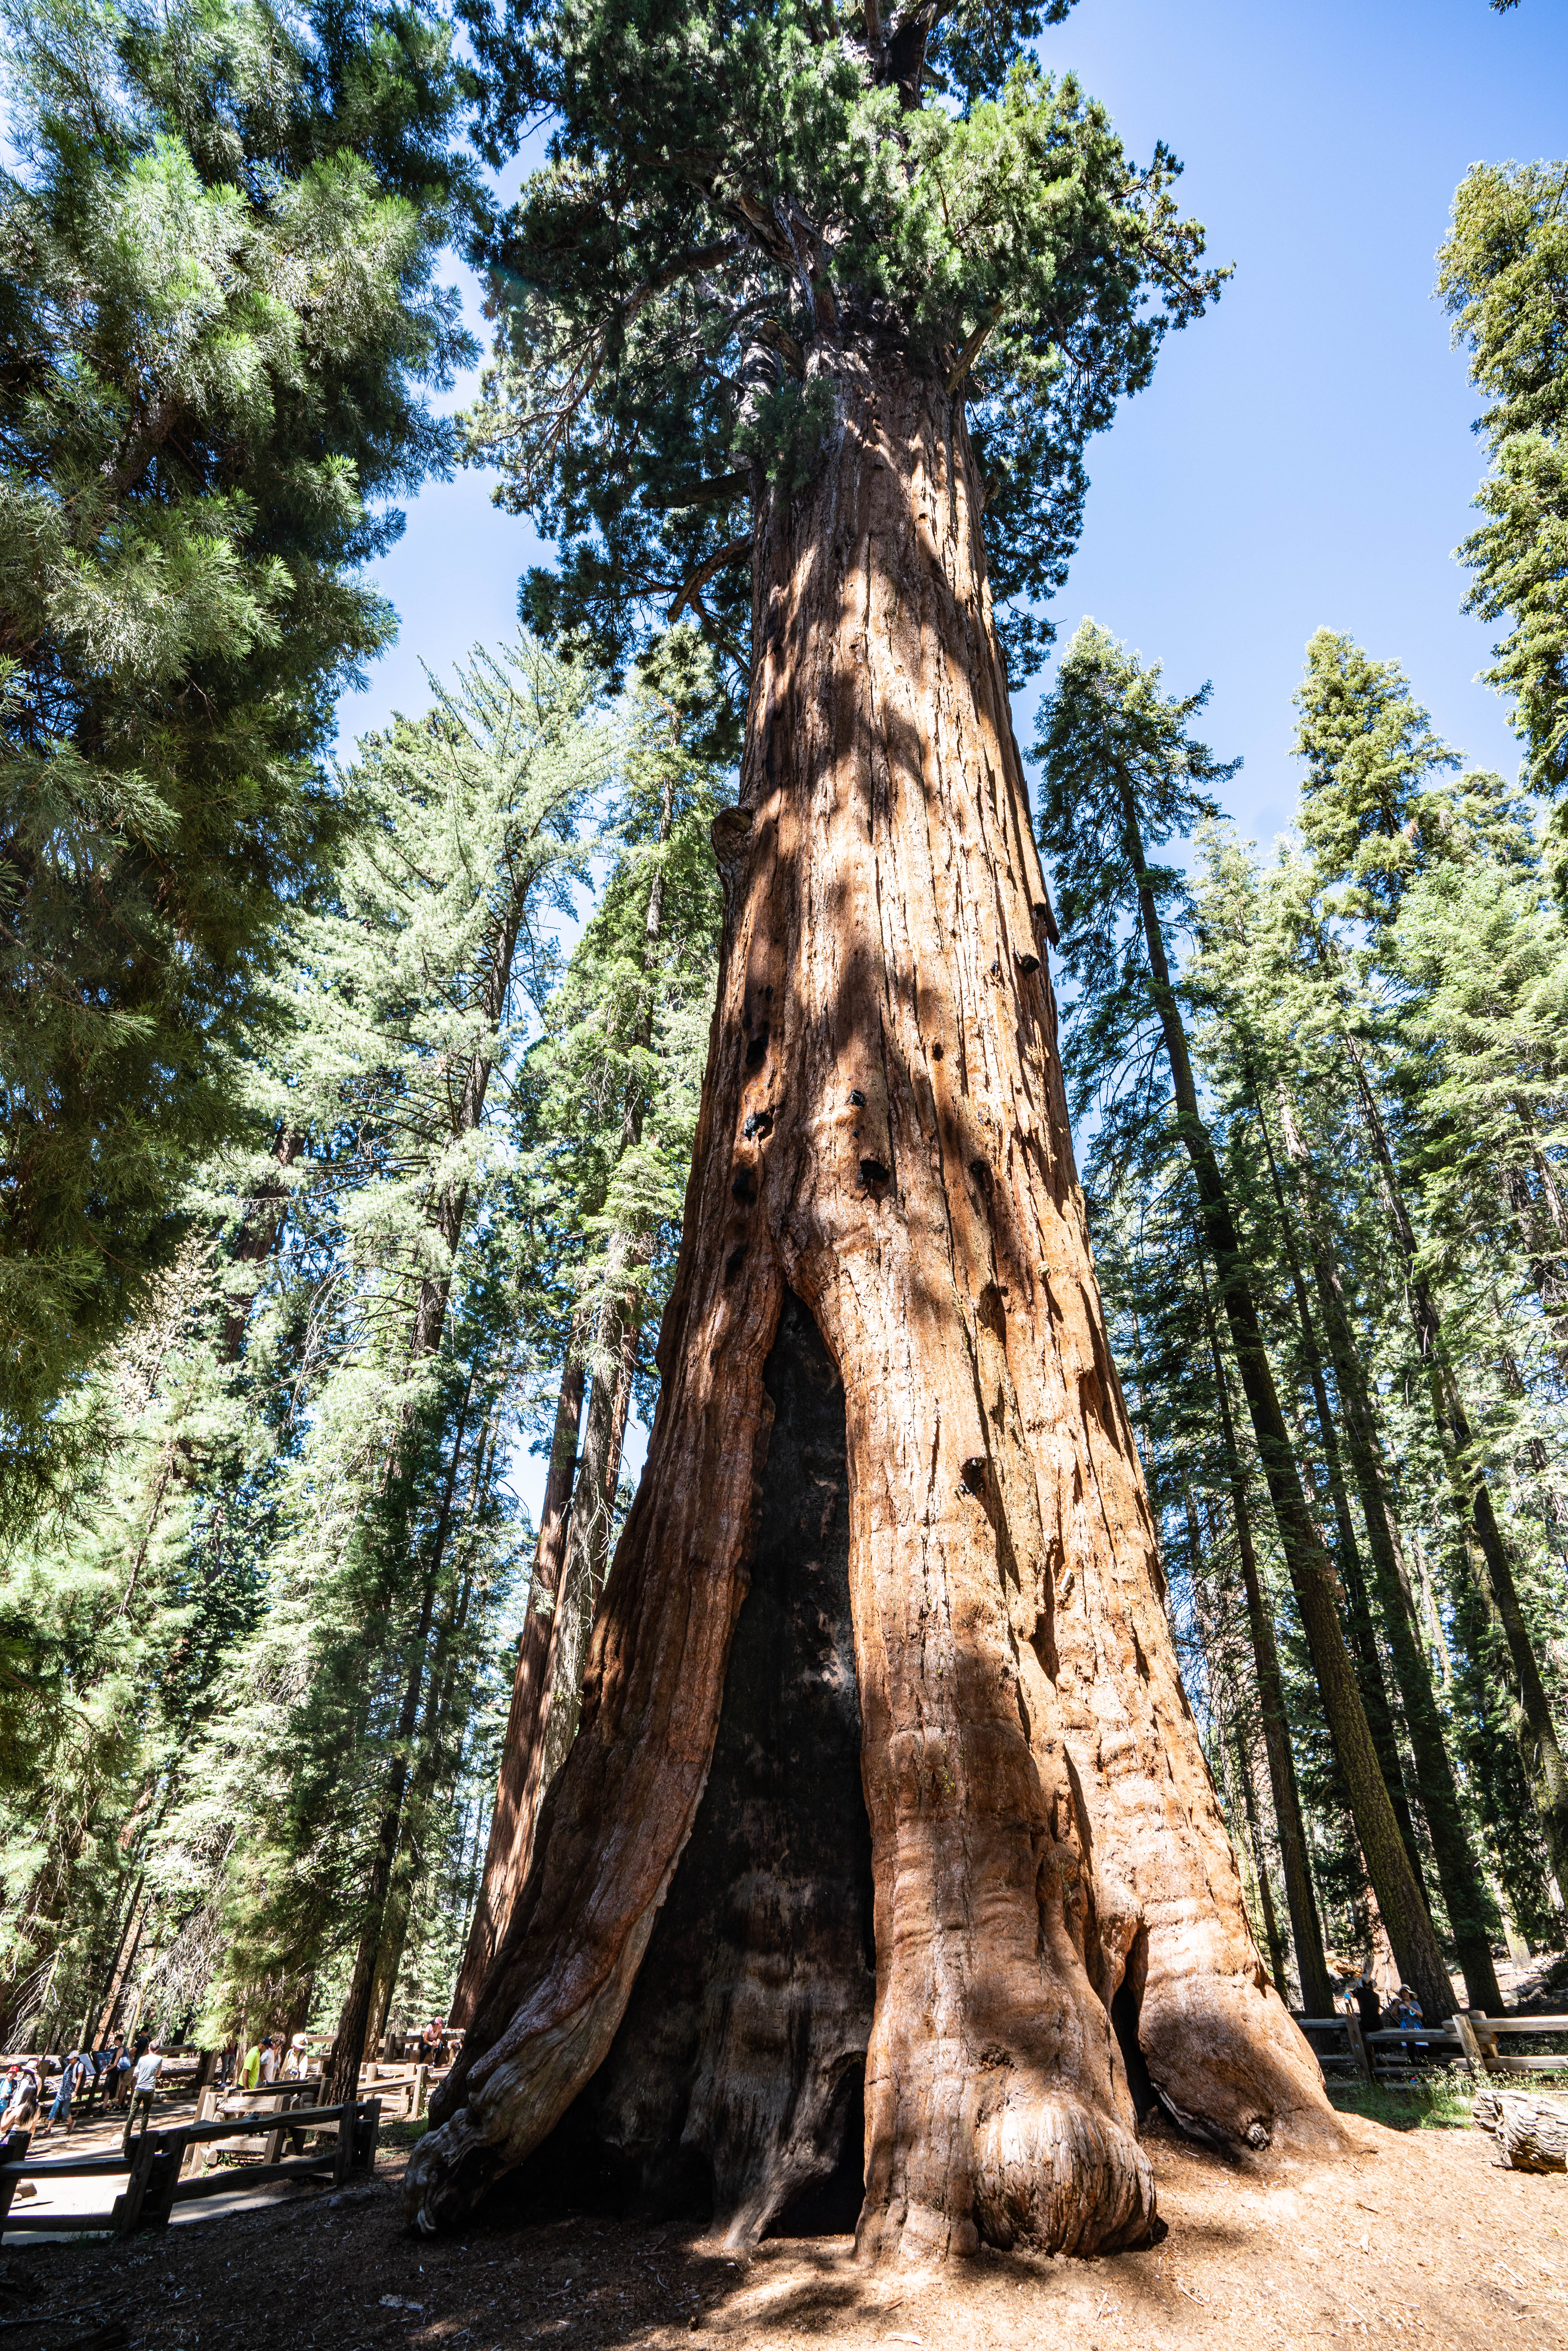 Tallest Tree in the world